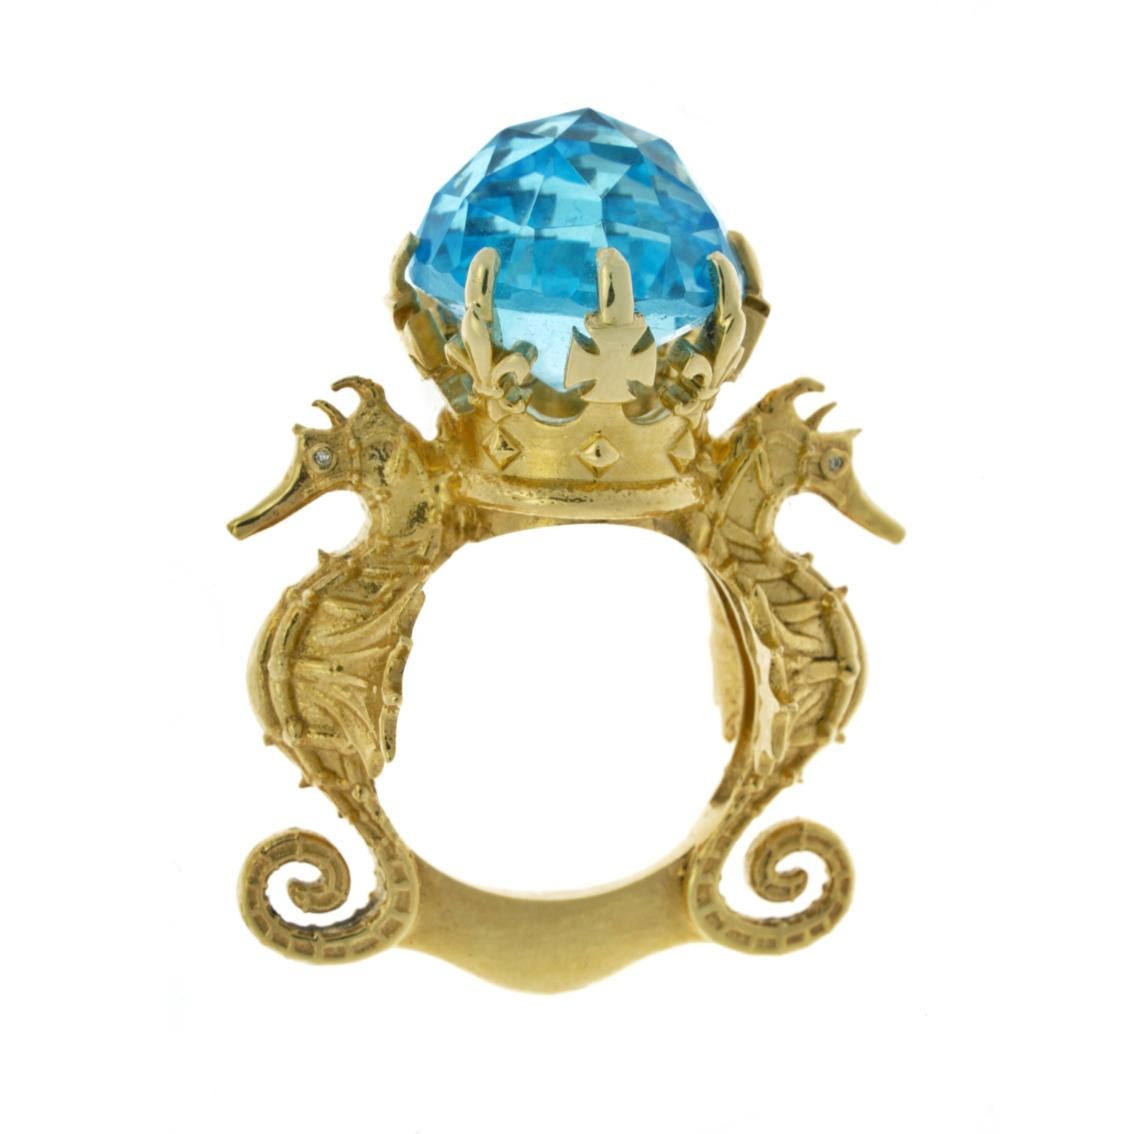 Hand crafted in 9kt yellow gold, the Amphitrite's Crown Ring features a luscious 12.6ct blue topaz perched in all it's glory atop a crown flanked by two guardian seahorses with 4 sparkling white diamond eyes.

This piece has a marvellous weight to